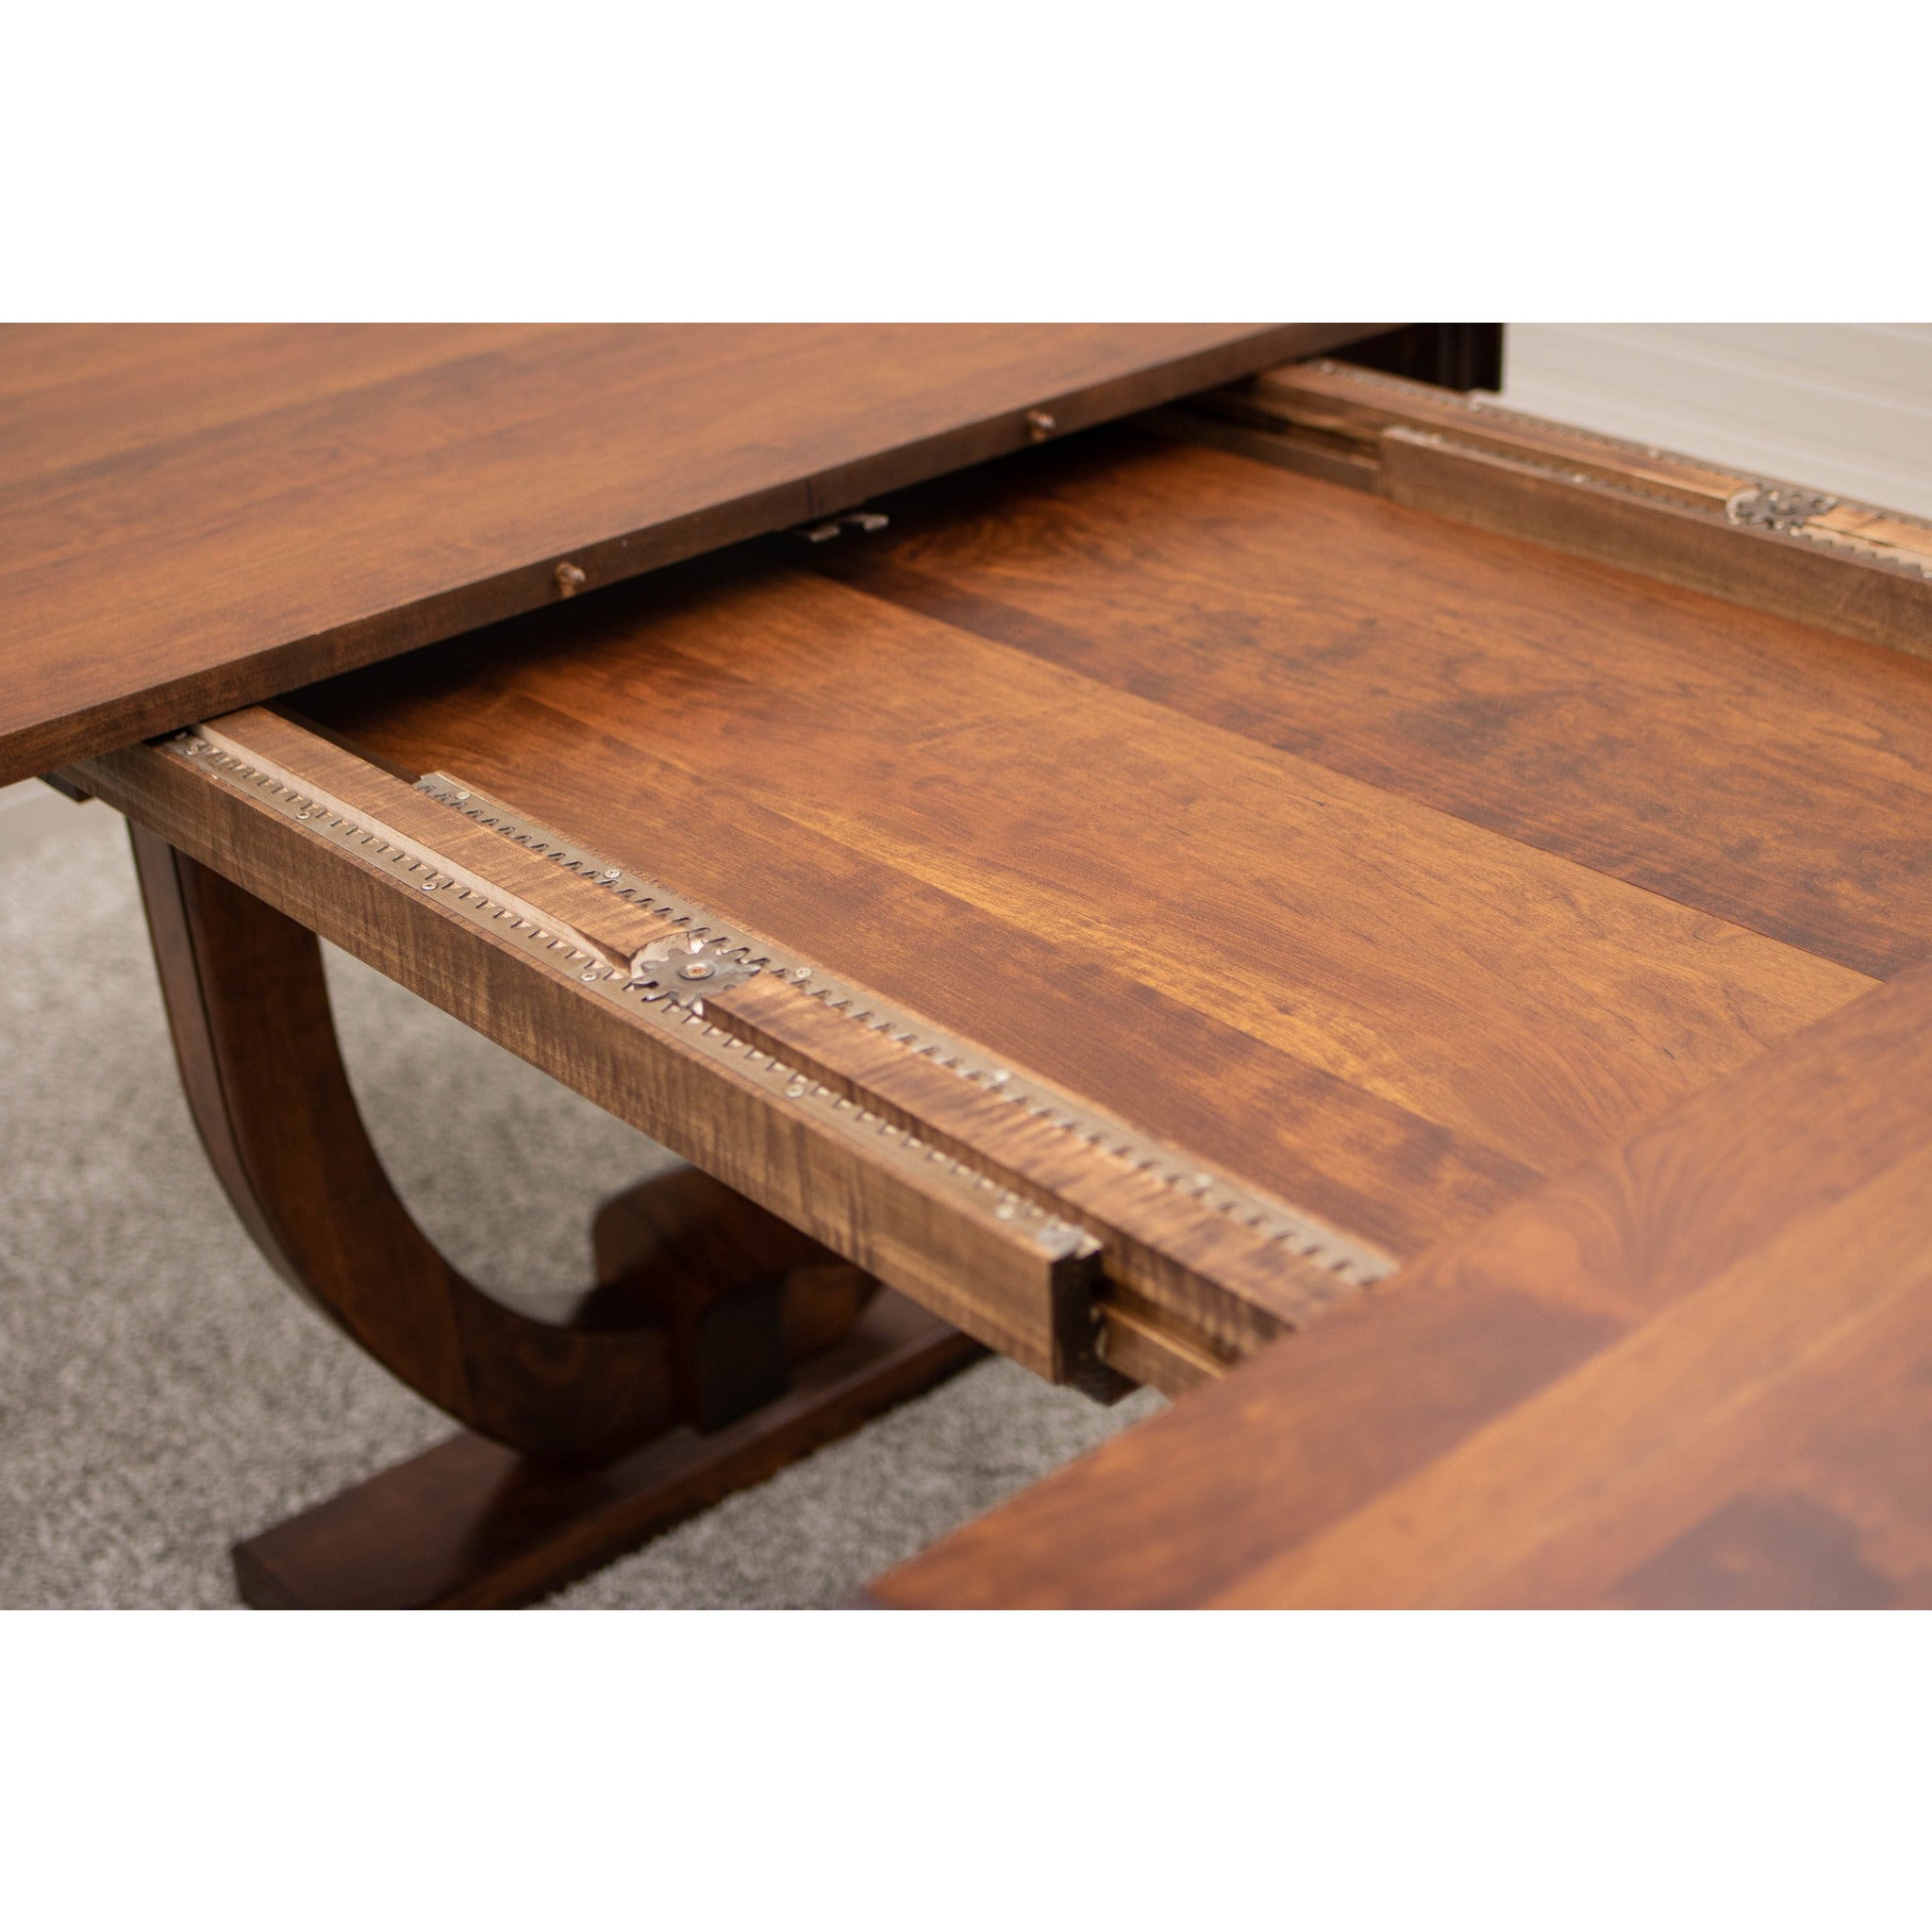 Biltmore Extending Dining Table